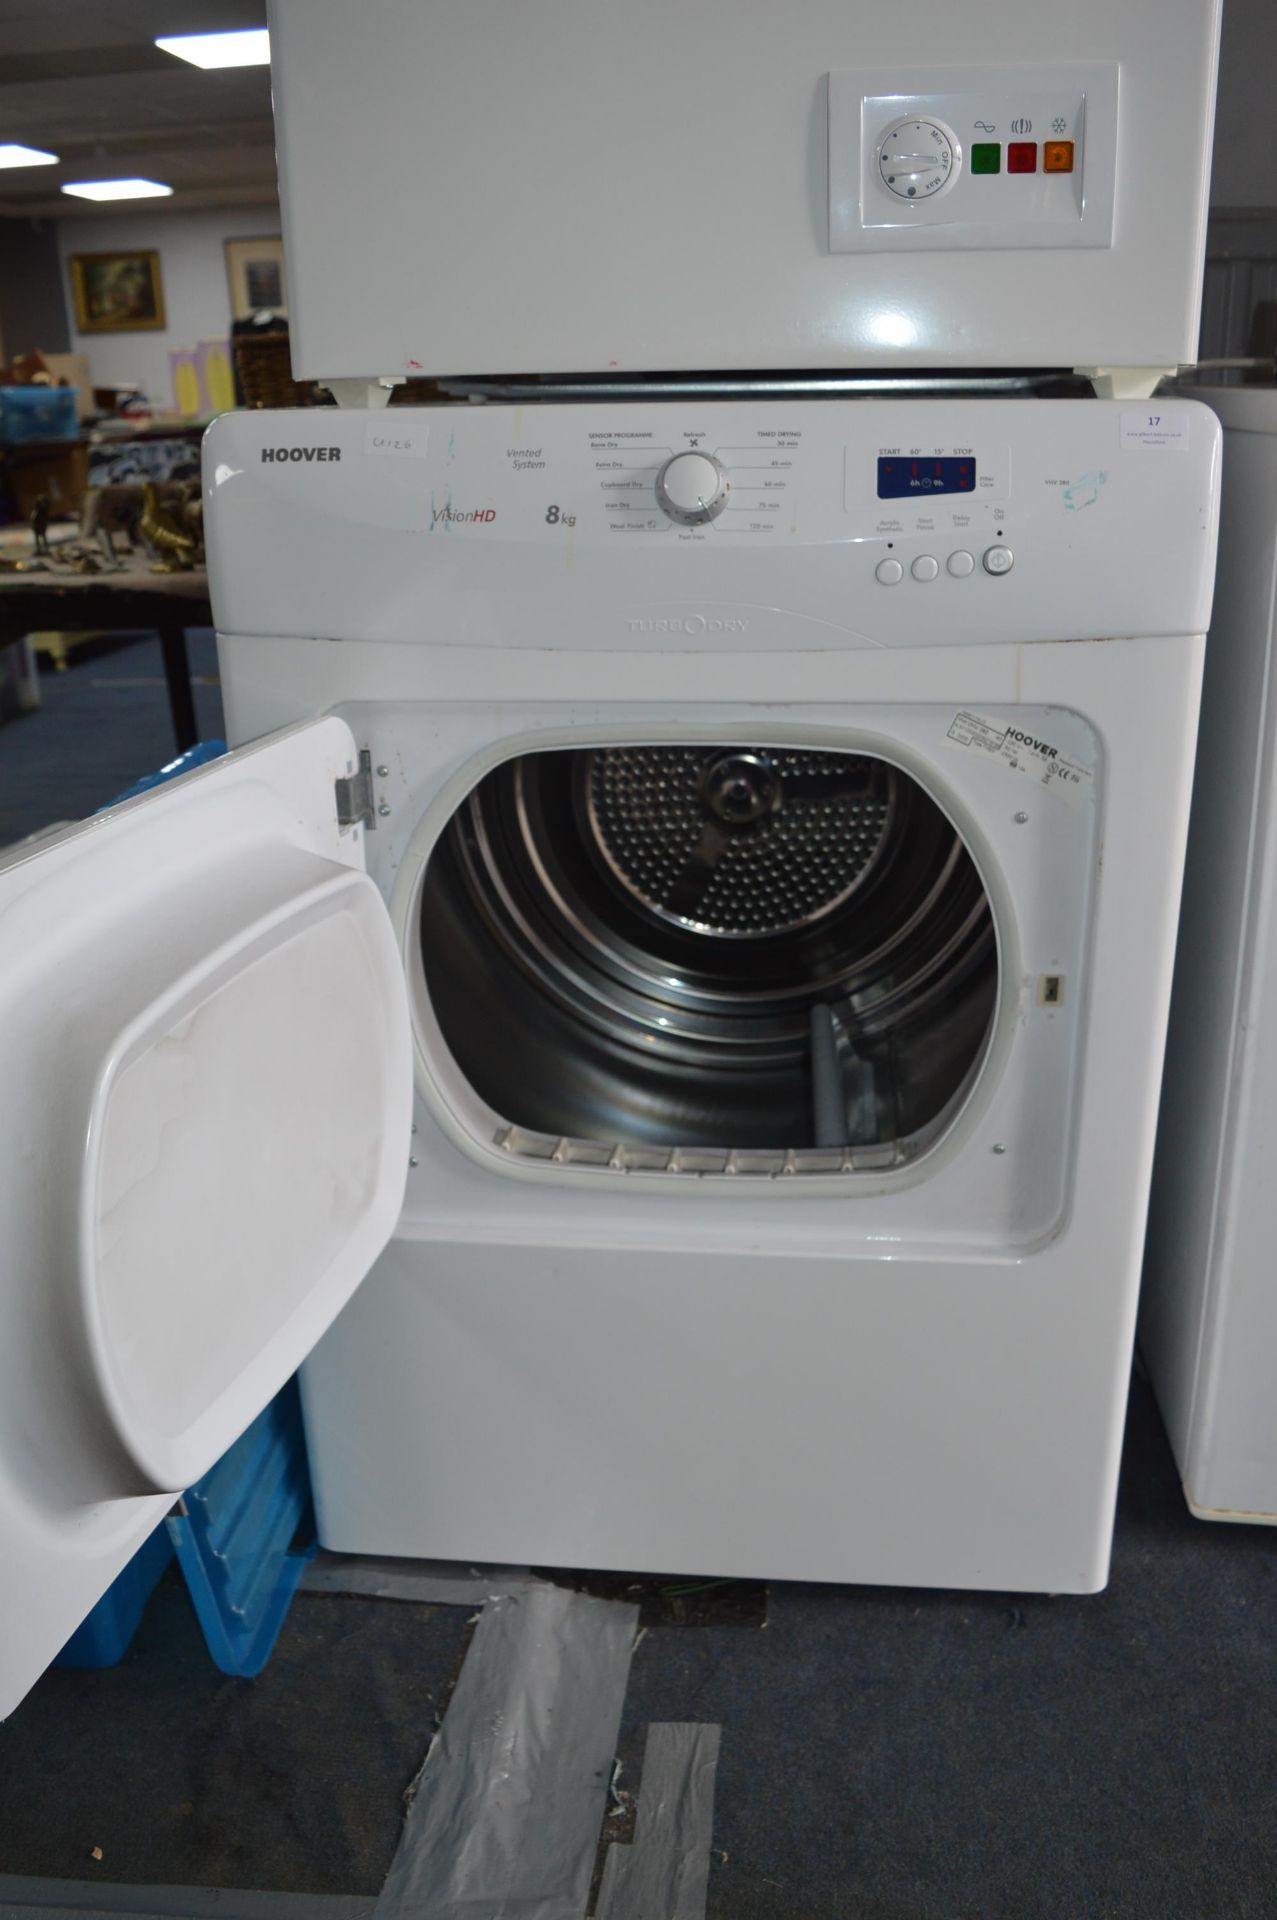 Hoover Vision 8kg Tumble Dryer - Image 2 of 2